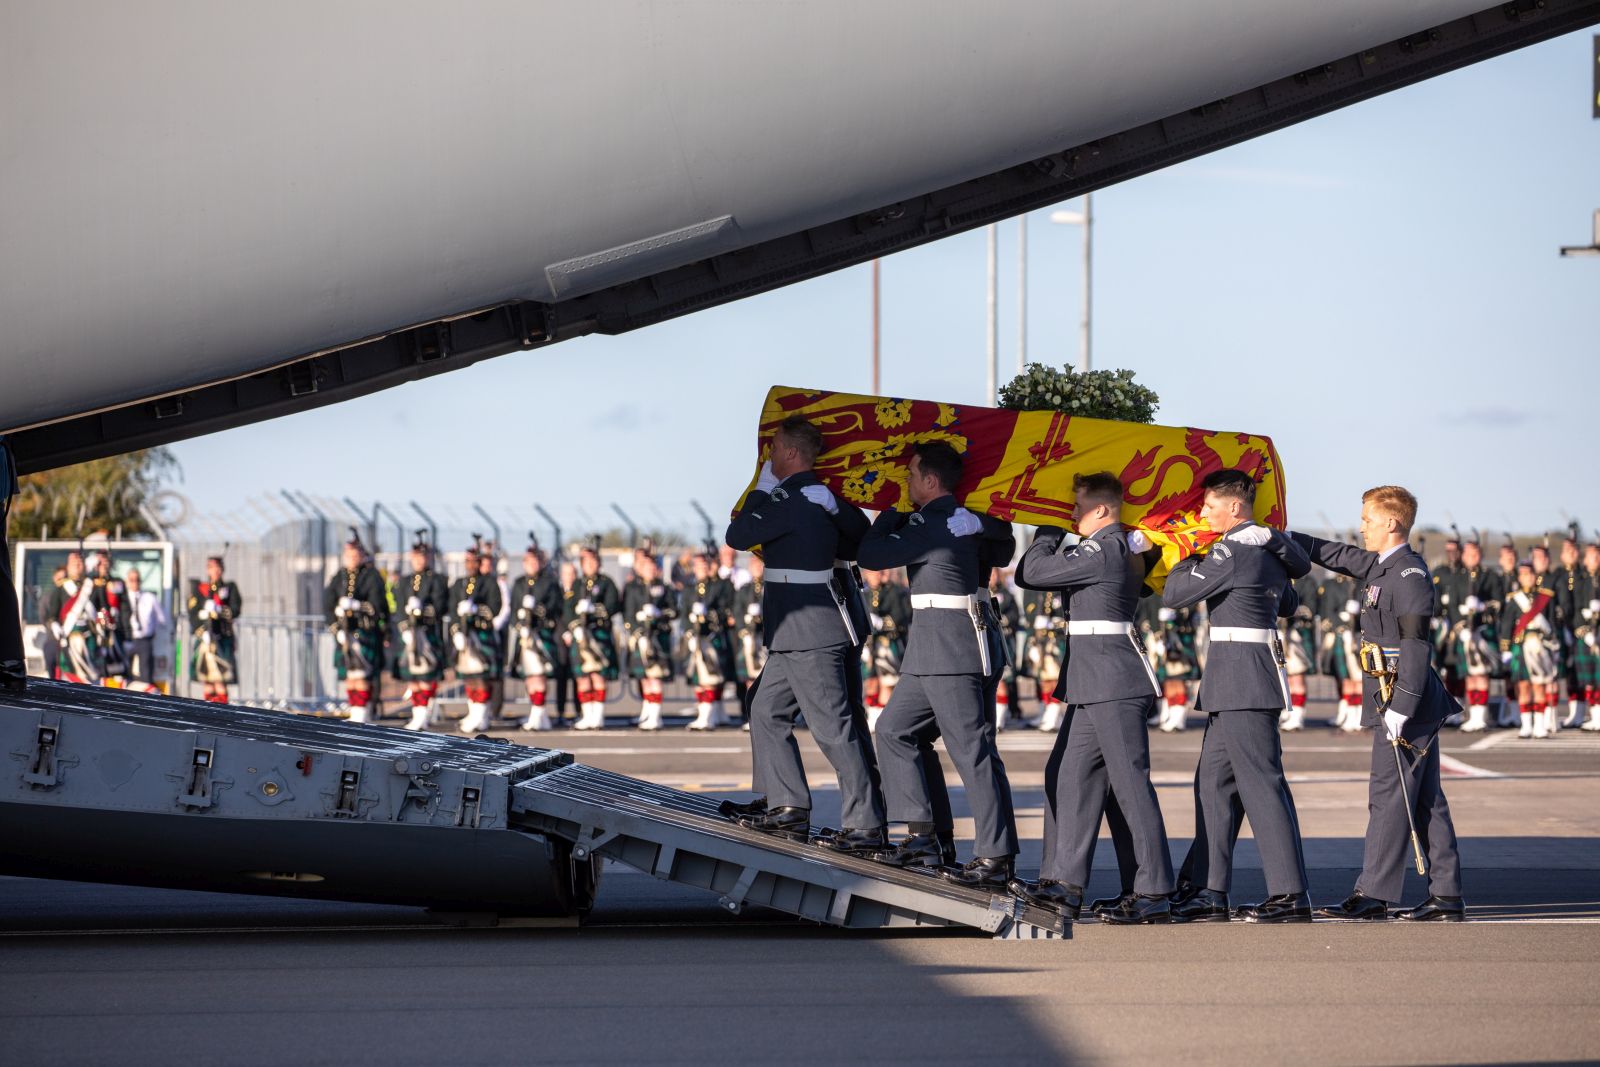 epa10182320 A handout picture provided by the British Ministry of Defence shows Pallbearers from the Royal Air Force Regiment carrying the coffin of Britain's Queen Elizabeth II past the Royal Regiment of Scotland as they displayed a Royal Salute at Edinburgh International Airport, in Edinburgh, Scotland, Britain, 13 September 2022. Queen Elizabeth II's coffin travelled from the heart of Edinburgh at St. Giles Cathedral to Edinburgh International Airport and was carried into an awaiting C17 aircraft and the carried by the RAF down to RAF Northolt where the coffin will continue onwards to the Palace of Westminster.  EPA/A/CPL Ciaran McFalls RAF/BRITISH MINISTRY OF DEFENCE/HANDOUT MANDATORY CREDIT: MOD/CROWN COPYRIGHT HANDOUT EDITORIAL USE ONLY/NO SALES